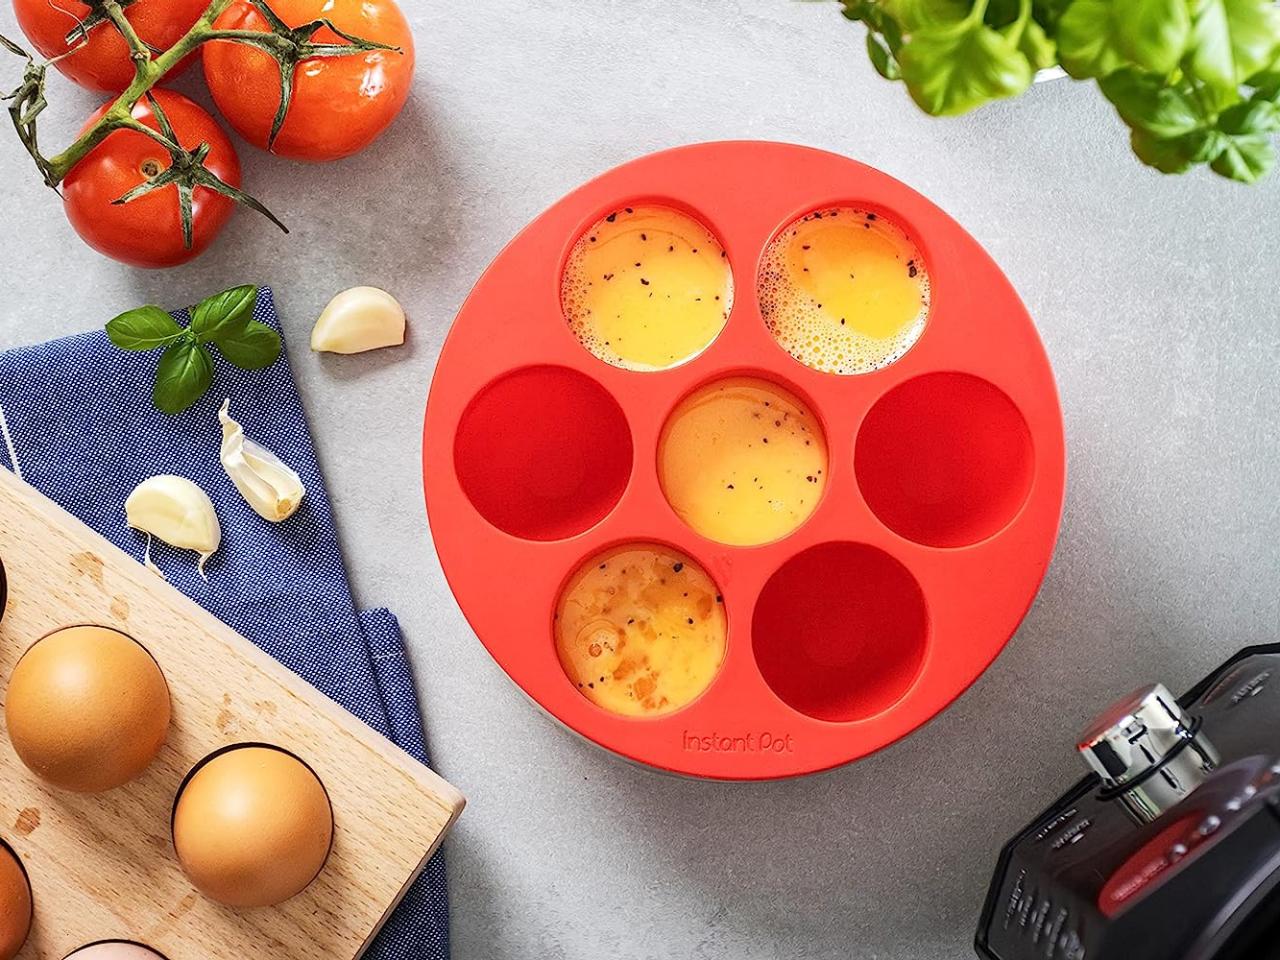 https://food.fnr.sndimg.com/content/dam/images/food/products/2023/7/17/rx_instant-pot-official-silicone-egg-bites-pan-with-lid.jpeg.rend.hgtvcom.1280.960.suffix/1689613037624.jpeg